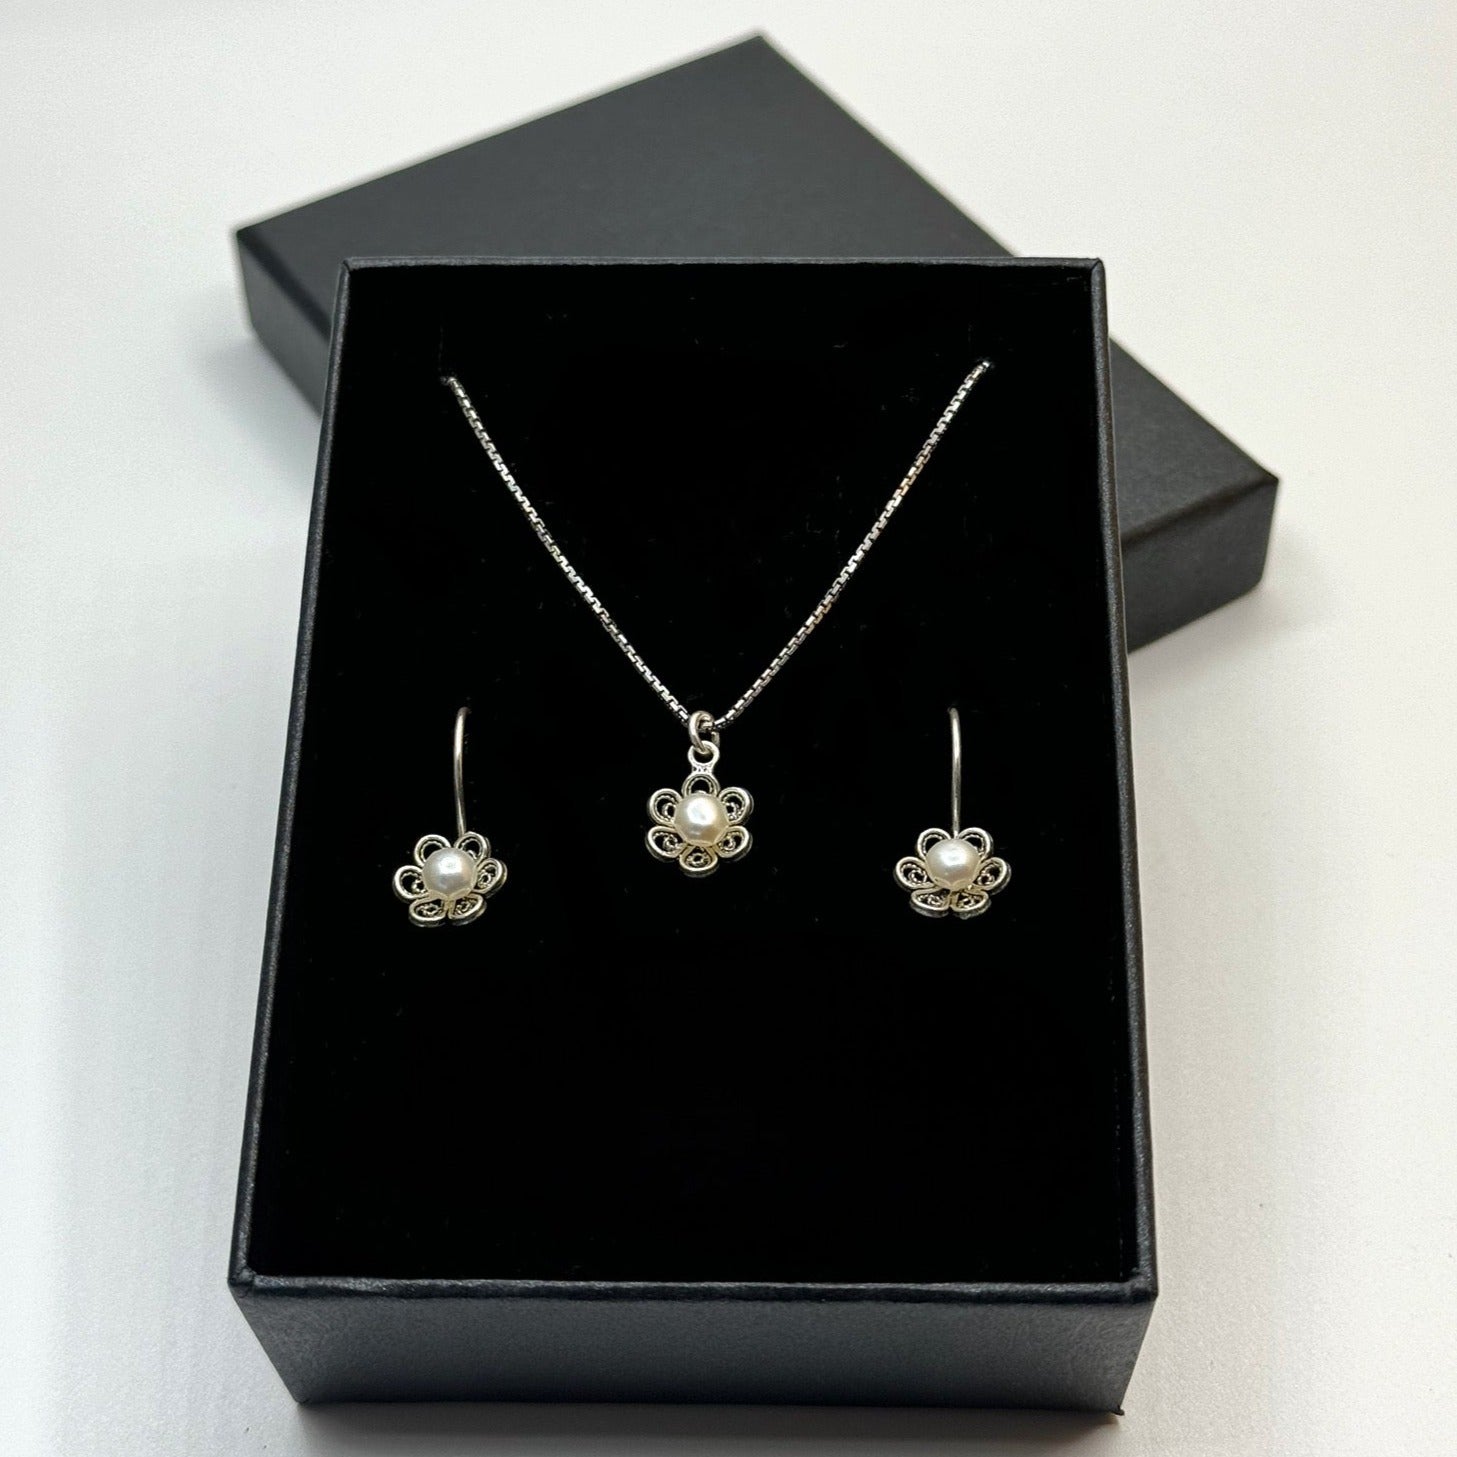 Flower Pearl Necklace and Stud Earrings Sterling Silver Set.  Jewelry set for her